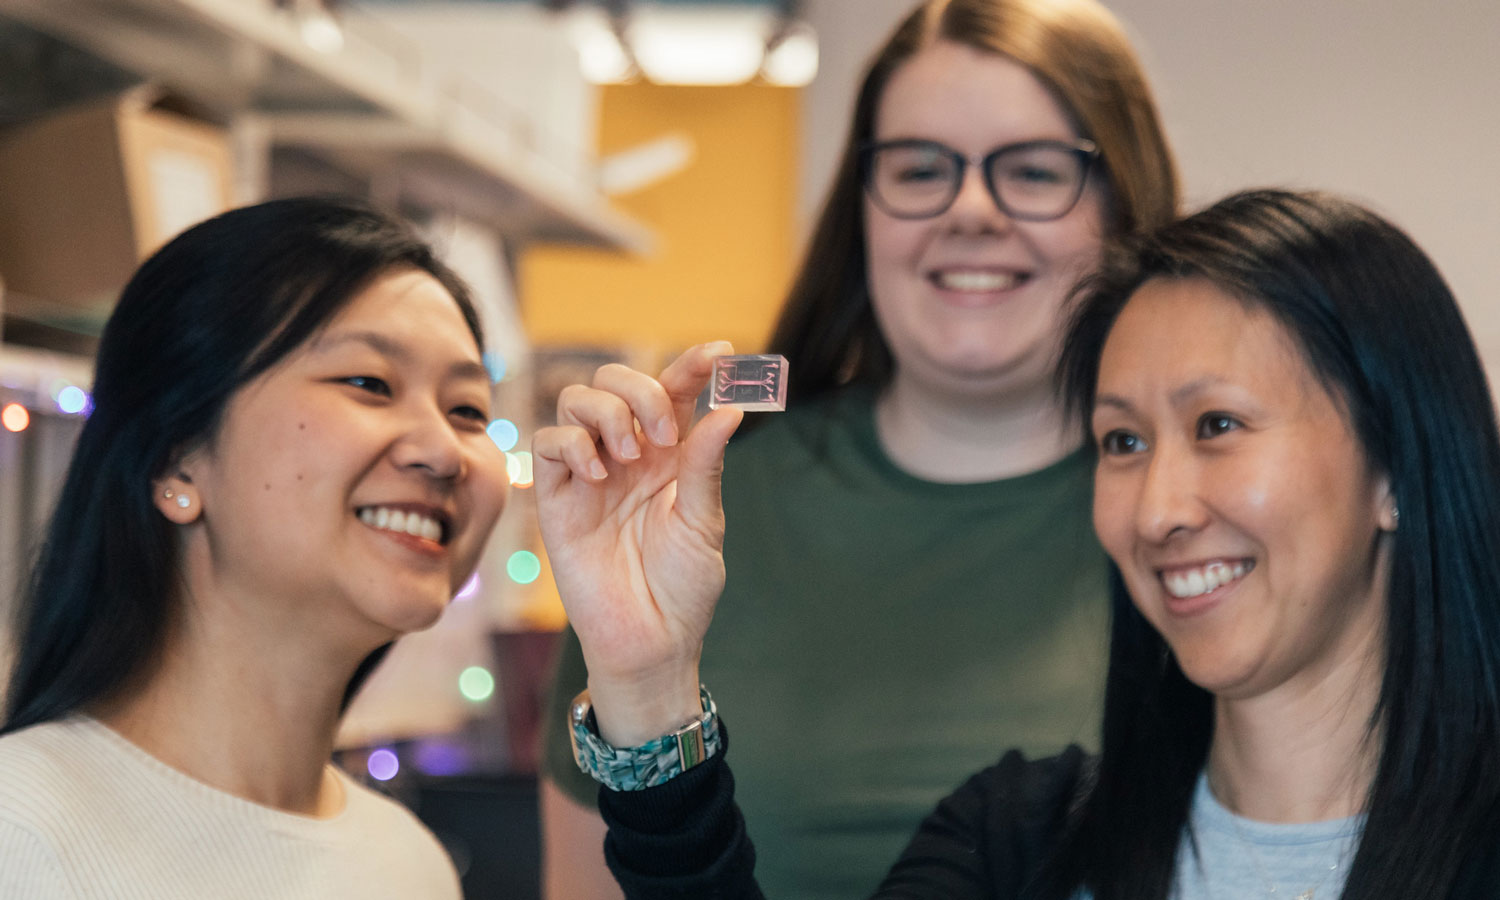 Priscilla Hwang Ph.D. (right) holds the “cancer-on-a-chip model,” a microfluidic model of breast cancer. With her are students Jessanne Lichtenberg (left) and Corinne Leonard (center)